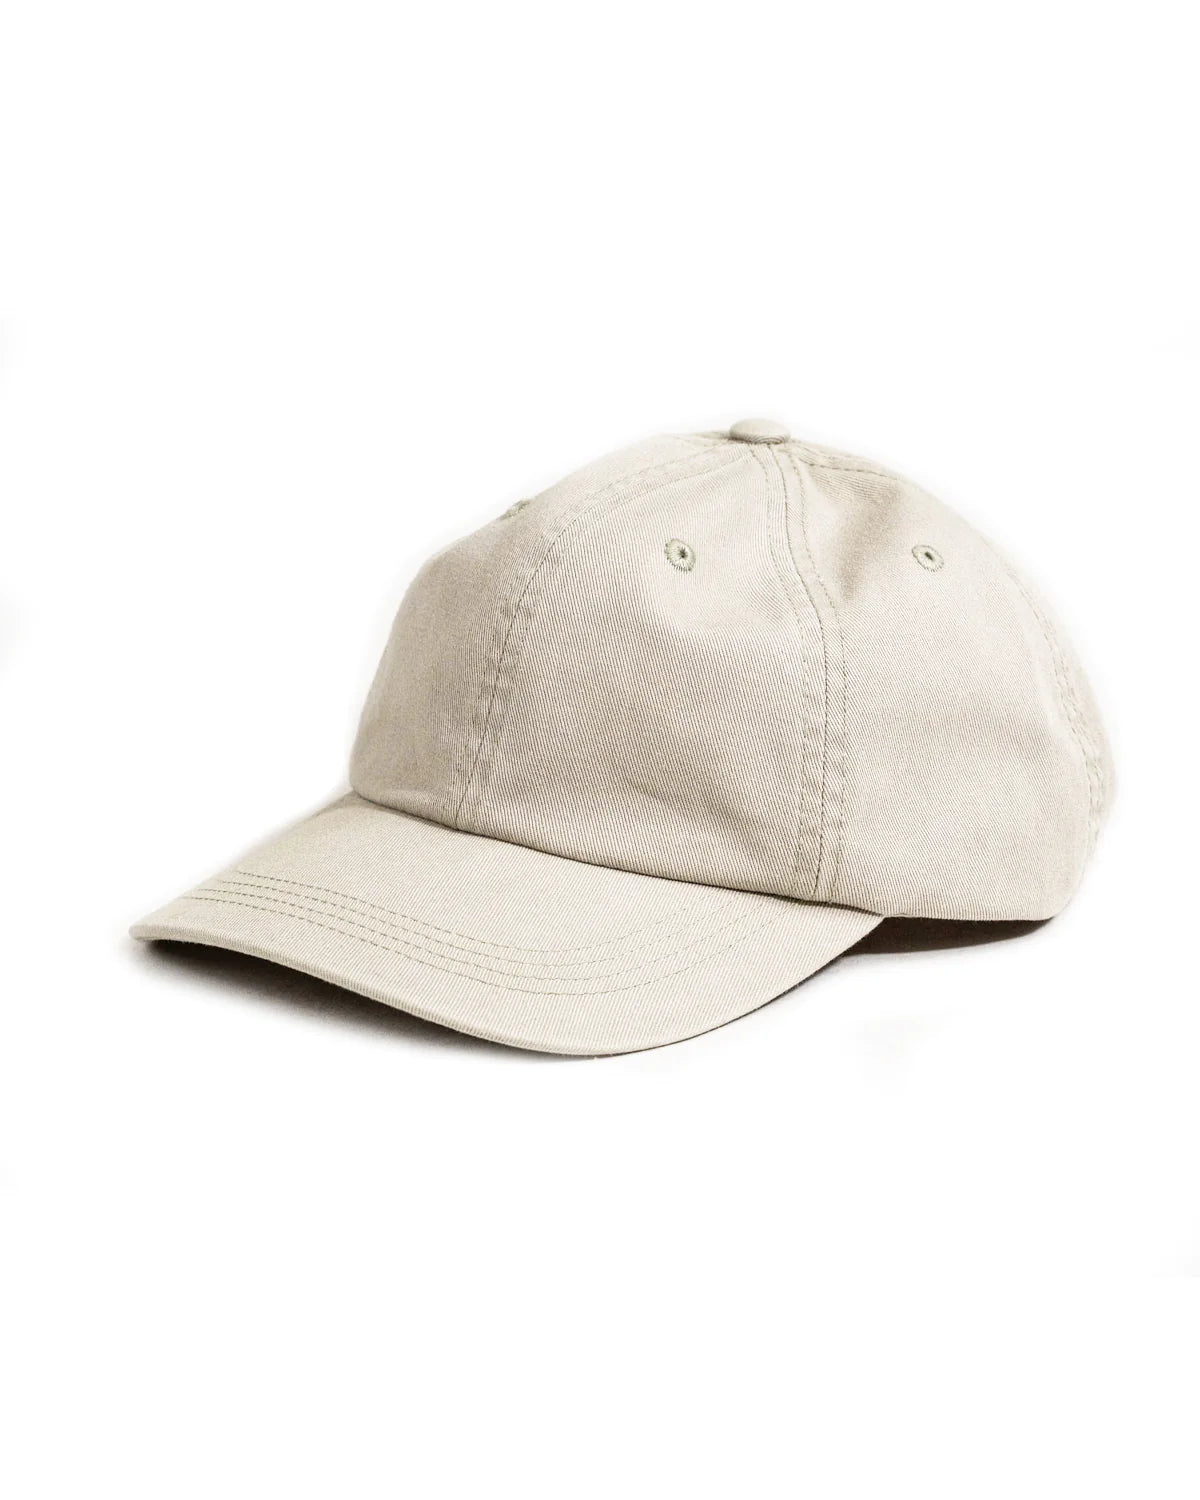 SS24 - The Coach Cap in Natural - front display 1